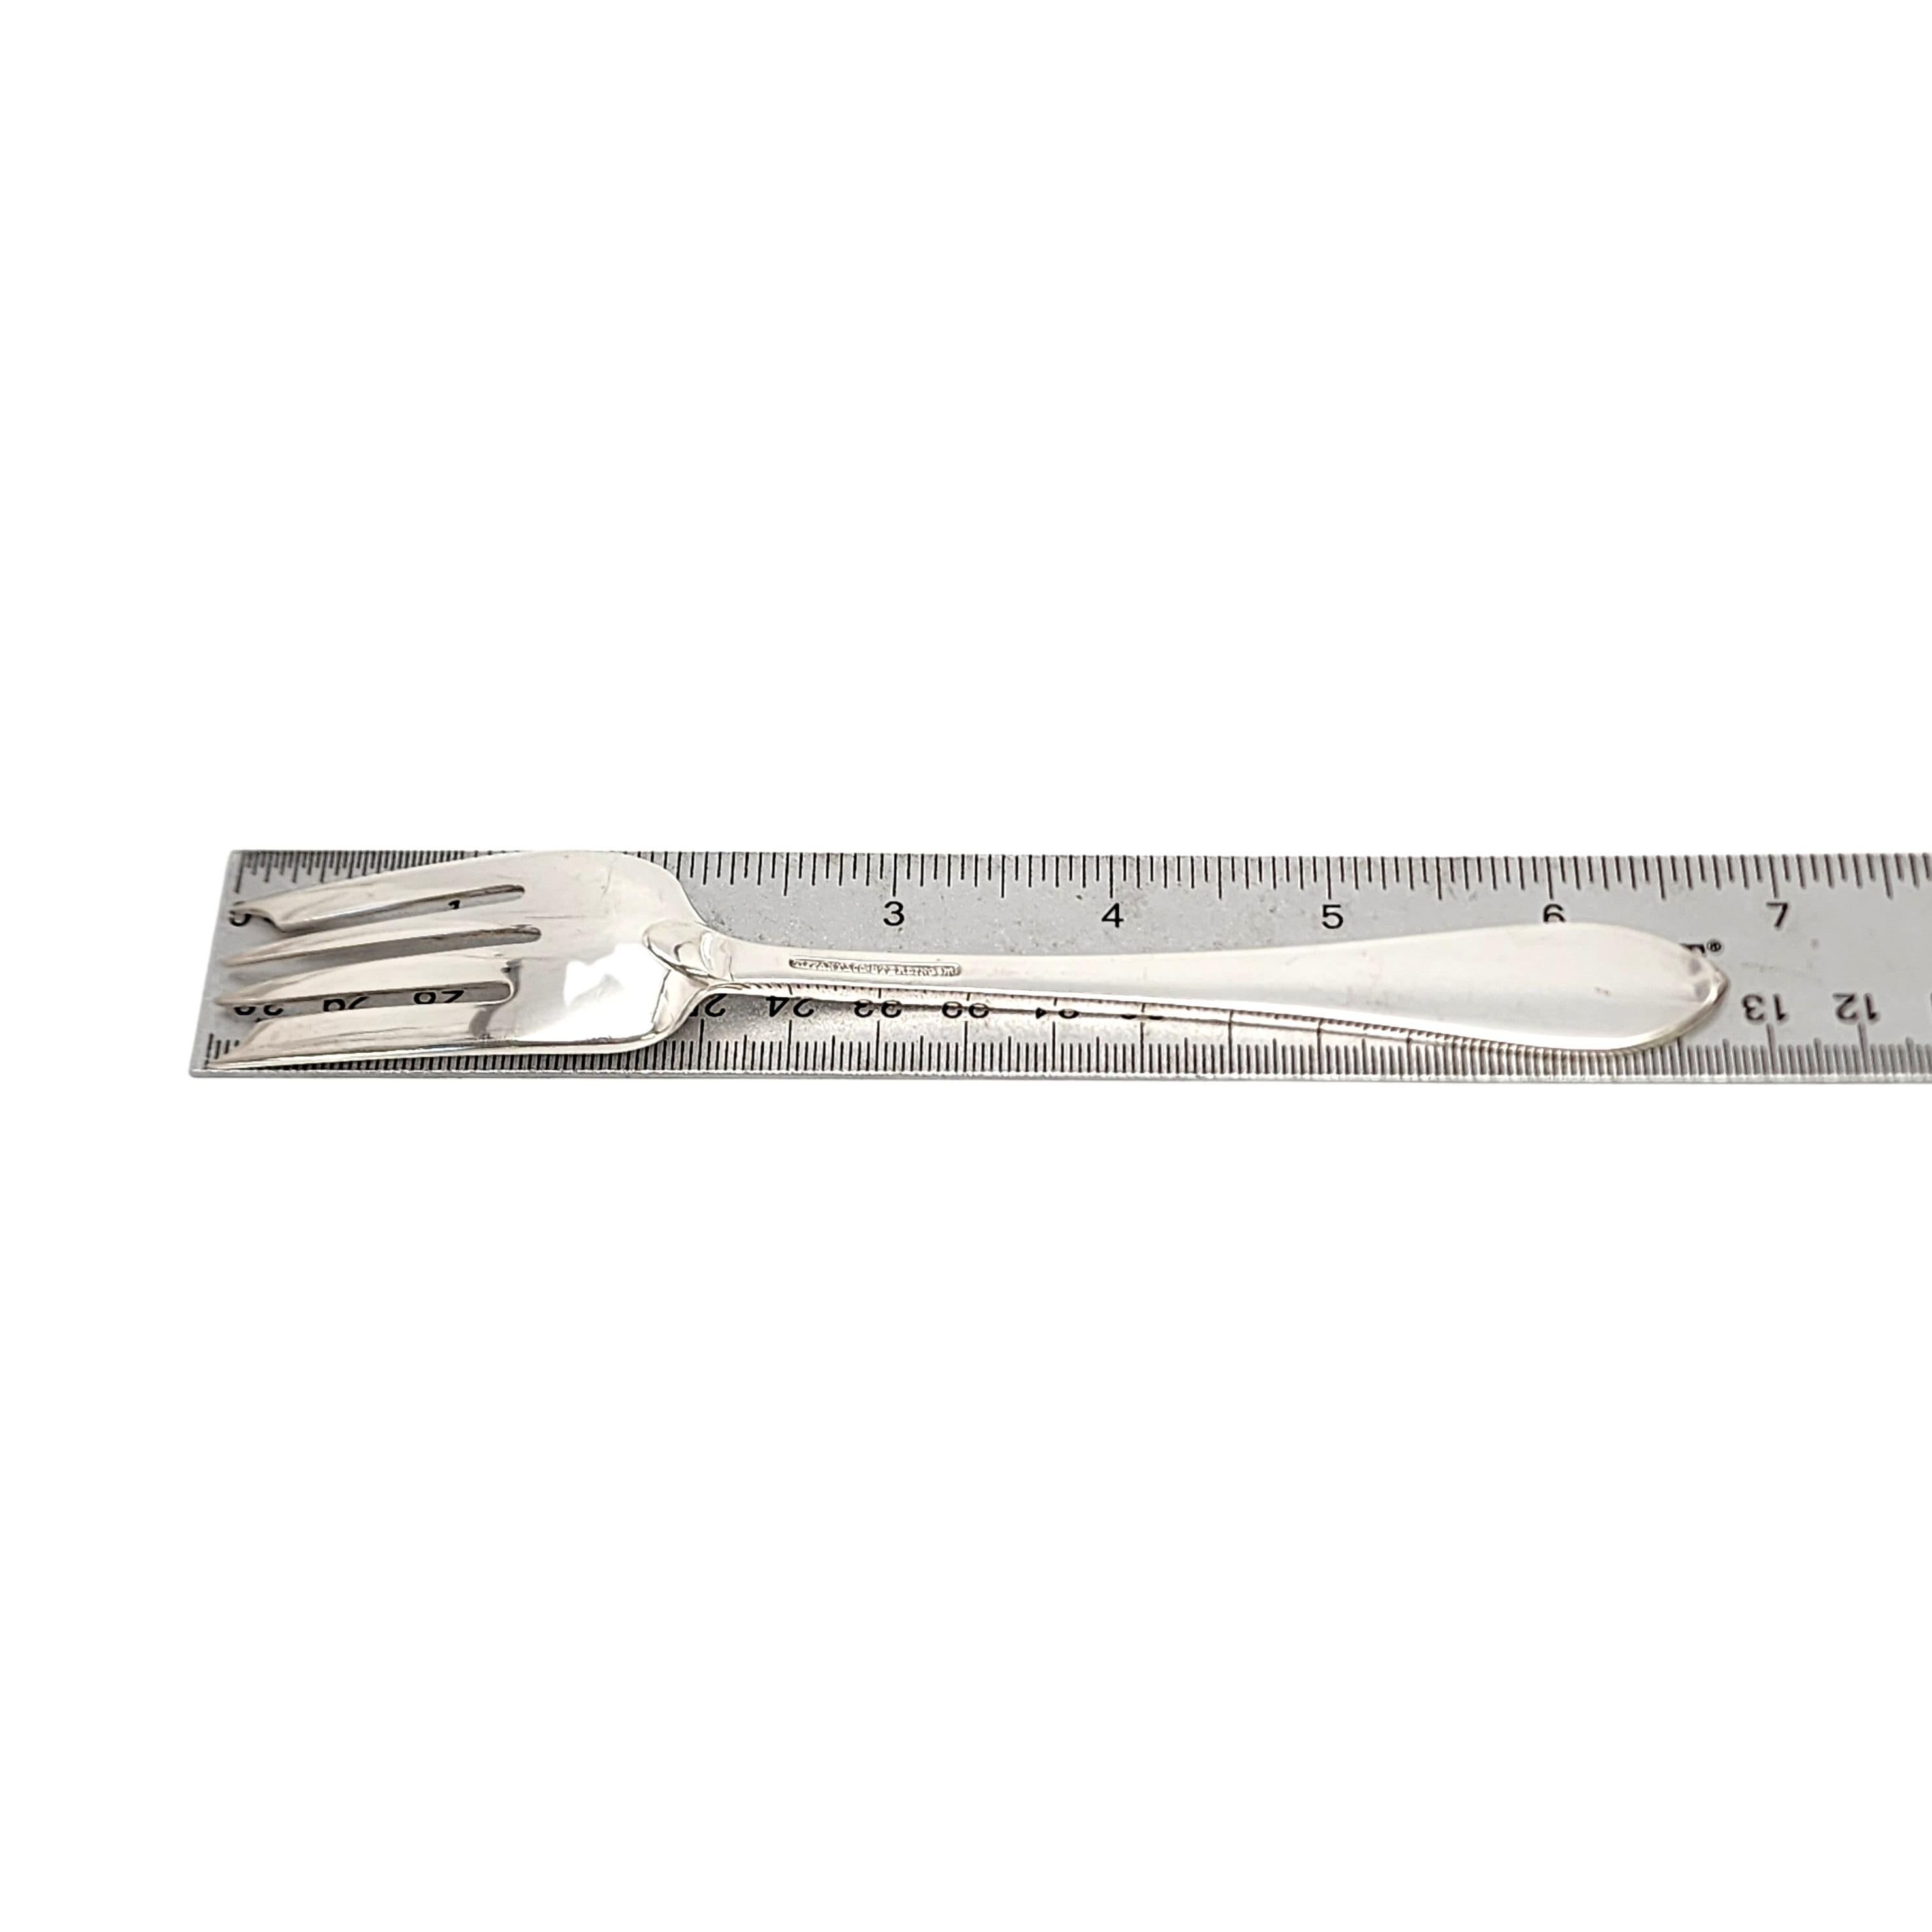 Tiffany & Co Sterling Silver Faneuil Salad Fork 3